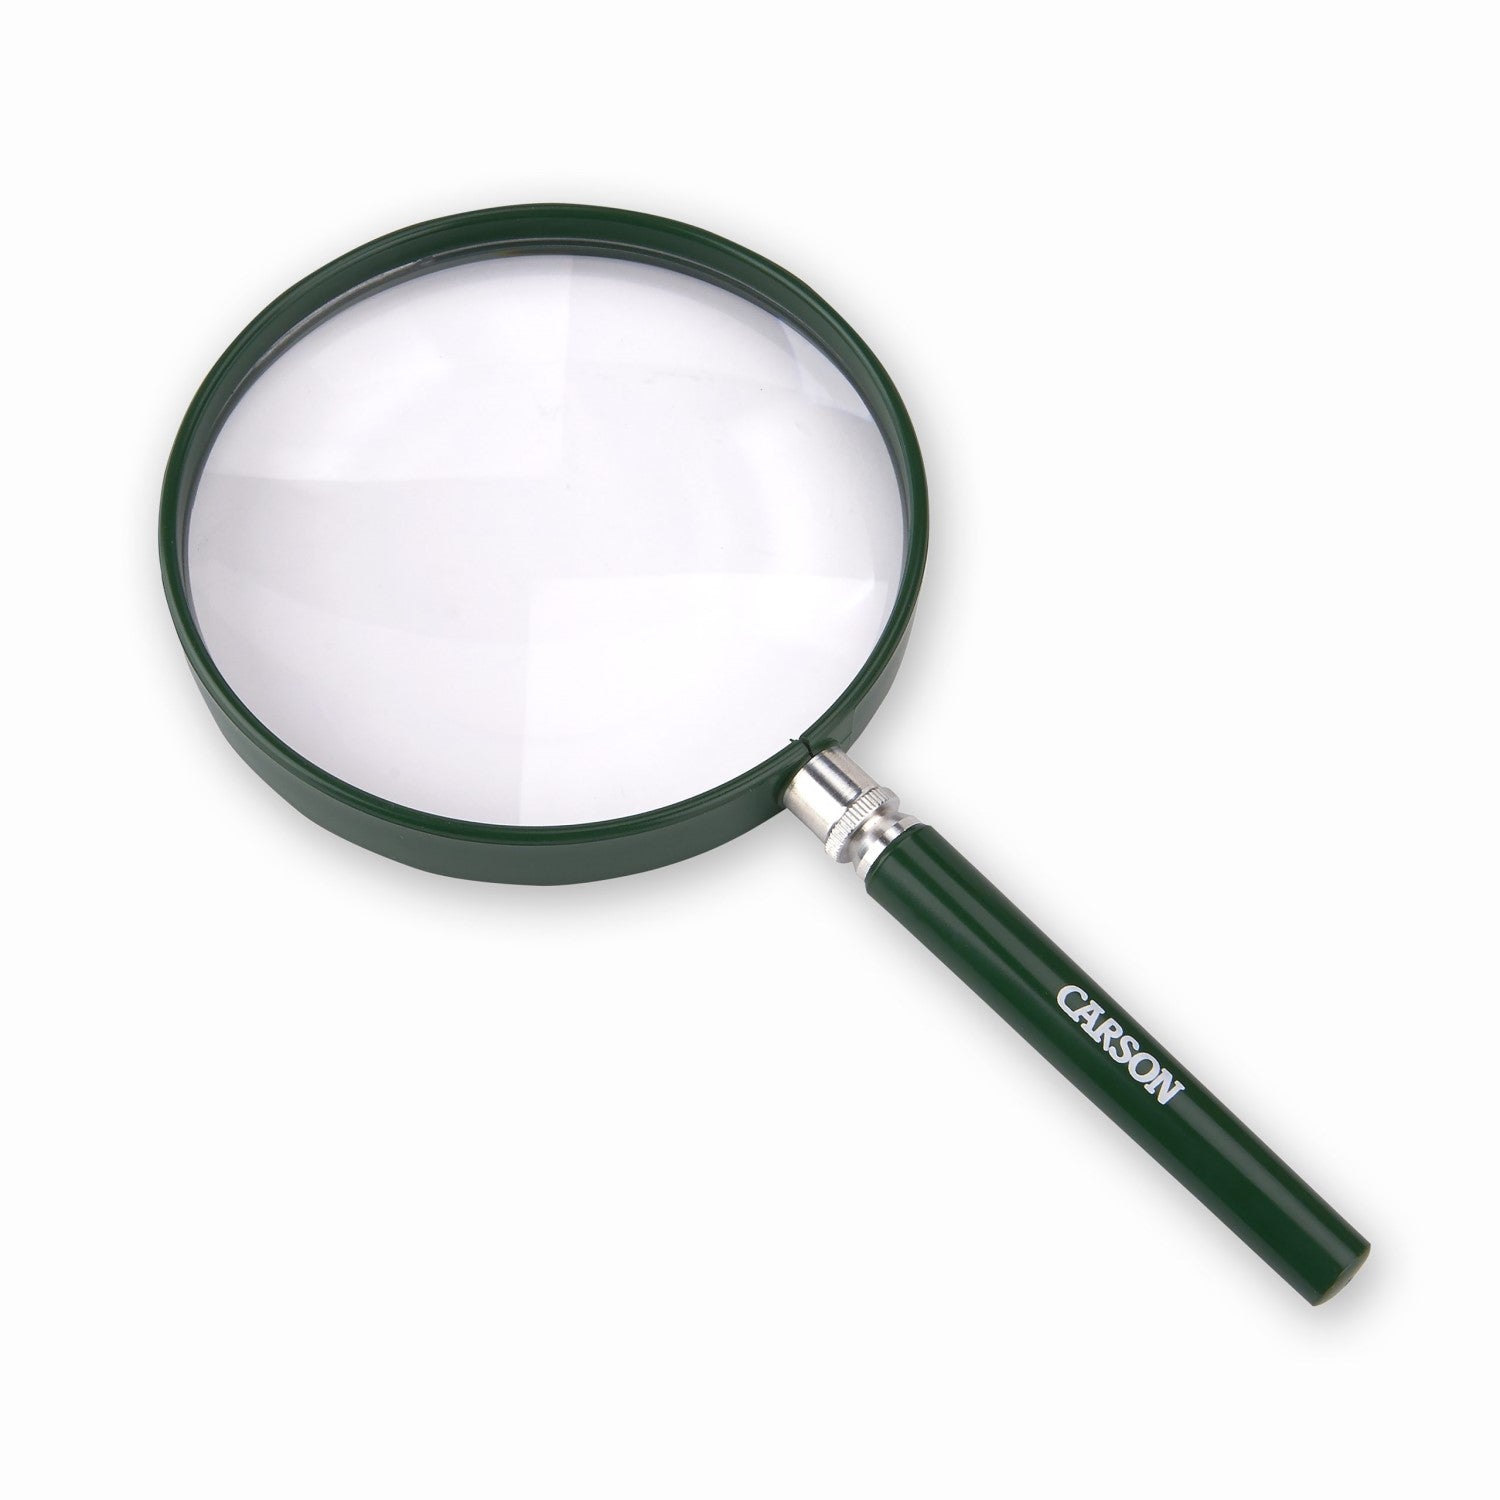 Image of the BigEye Hand Magnifier.